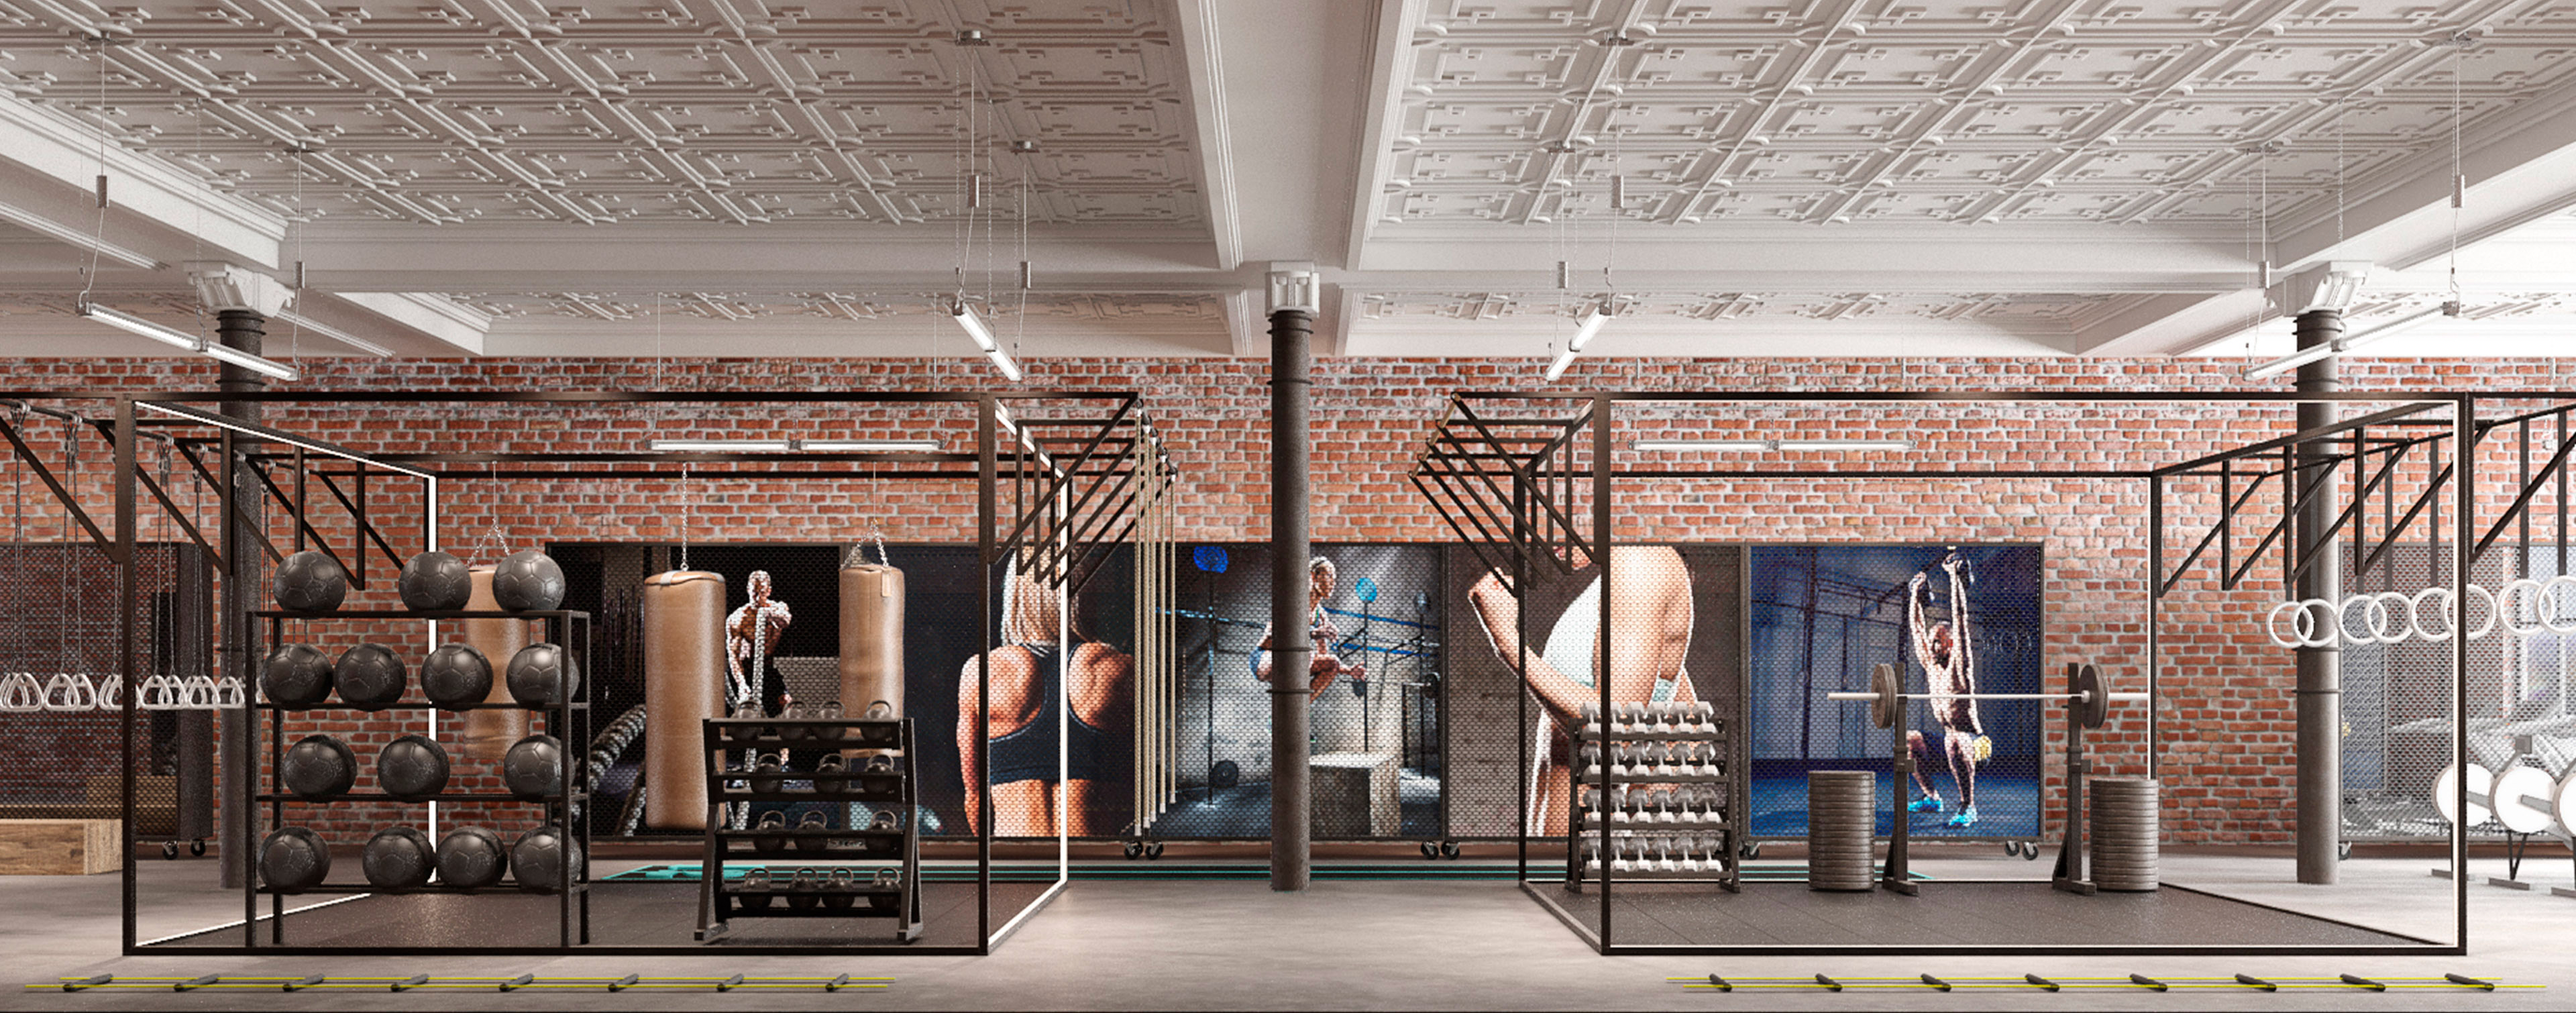 luv studio luxury architects new york fit house gym IMG 01 - Fit House